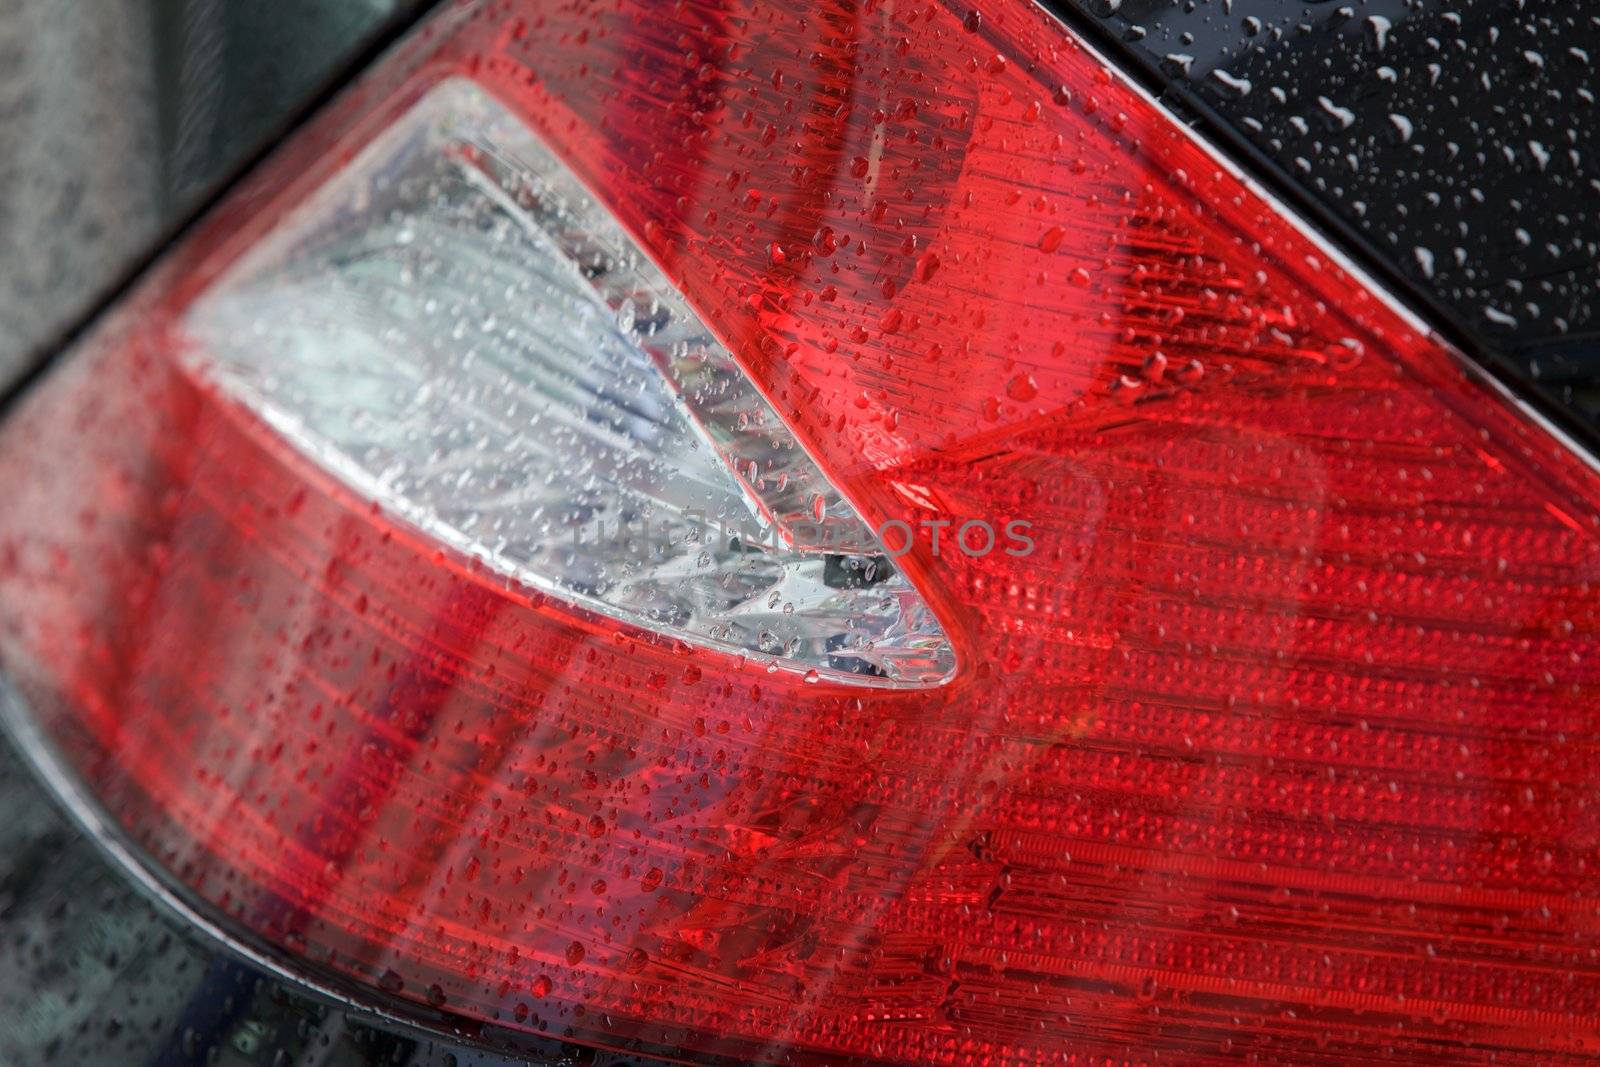 Close-up of tail light of car for sale in showroom